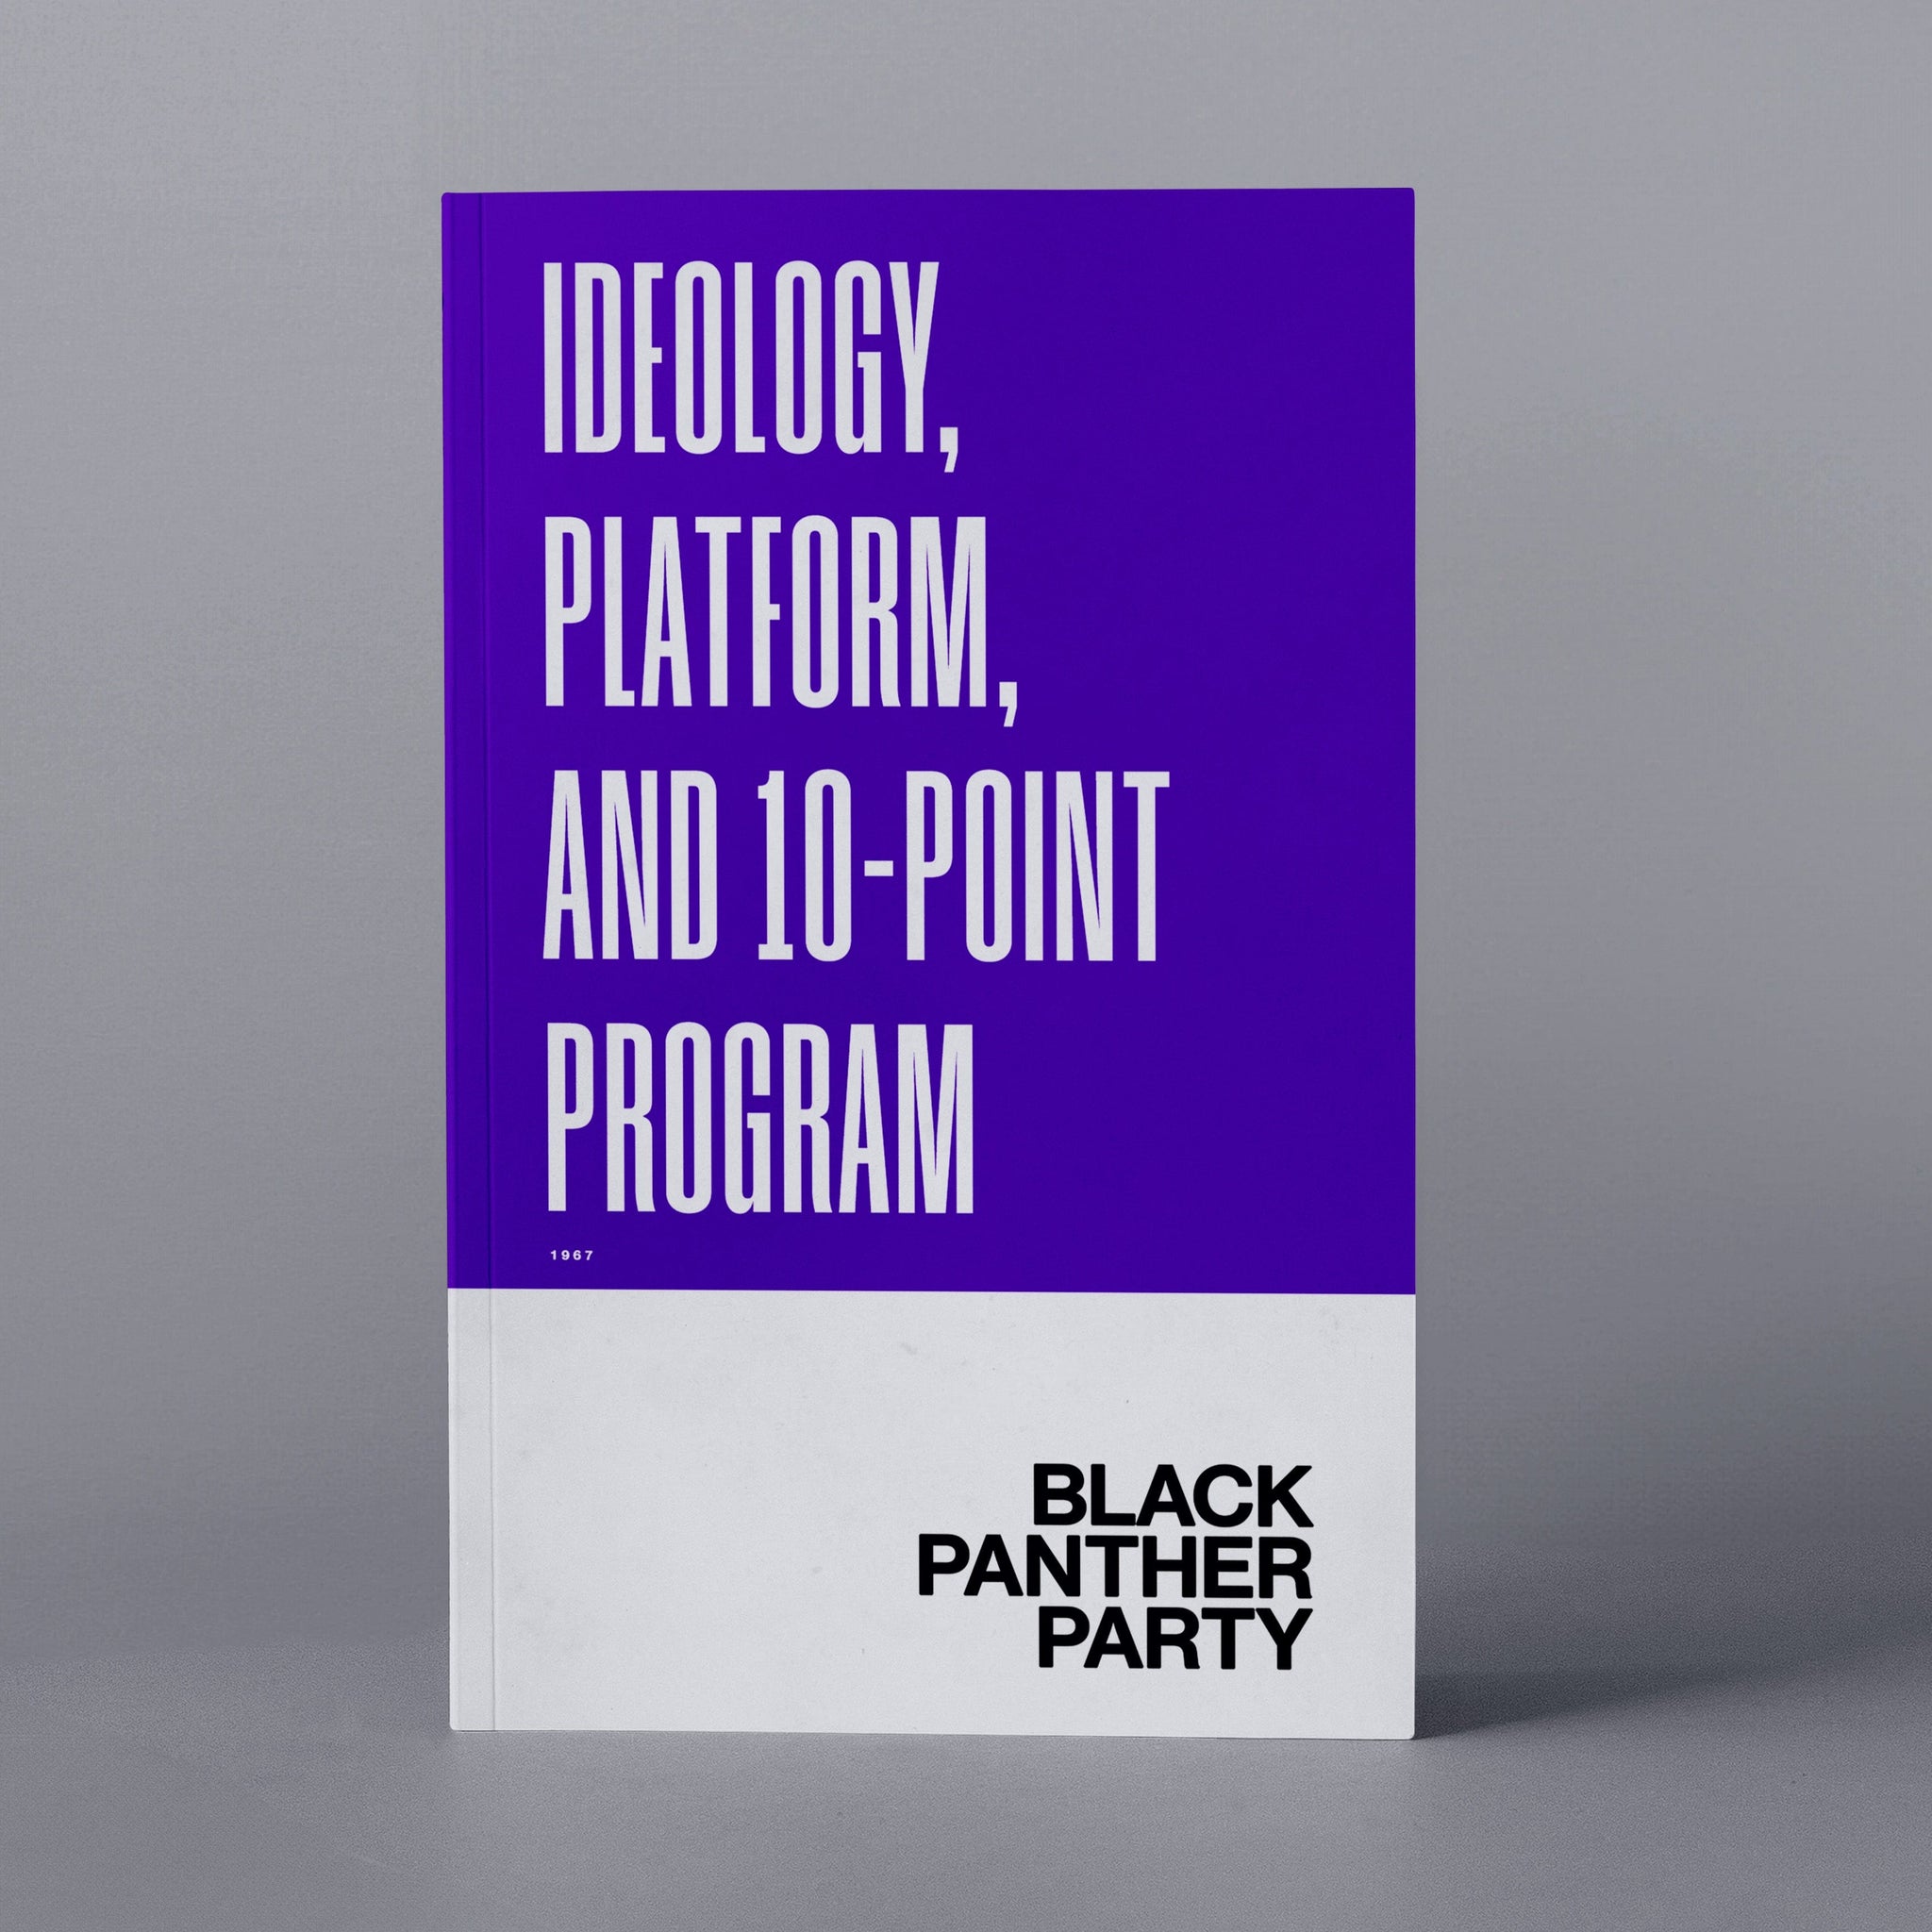 1967: Ideology, Platform, and 10-Point Program (Black Panther Party)